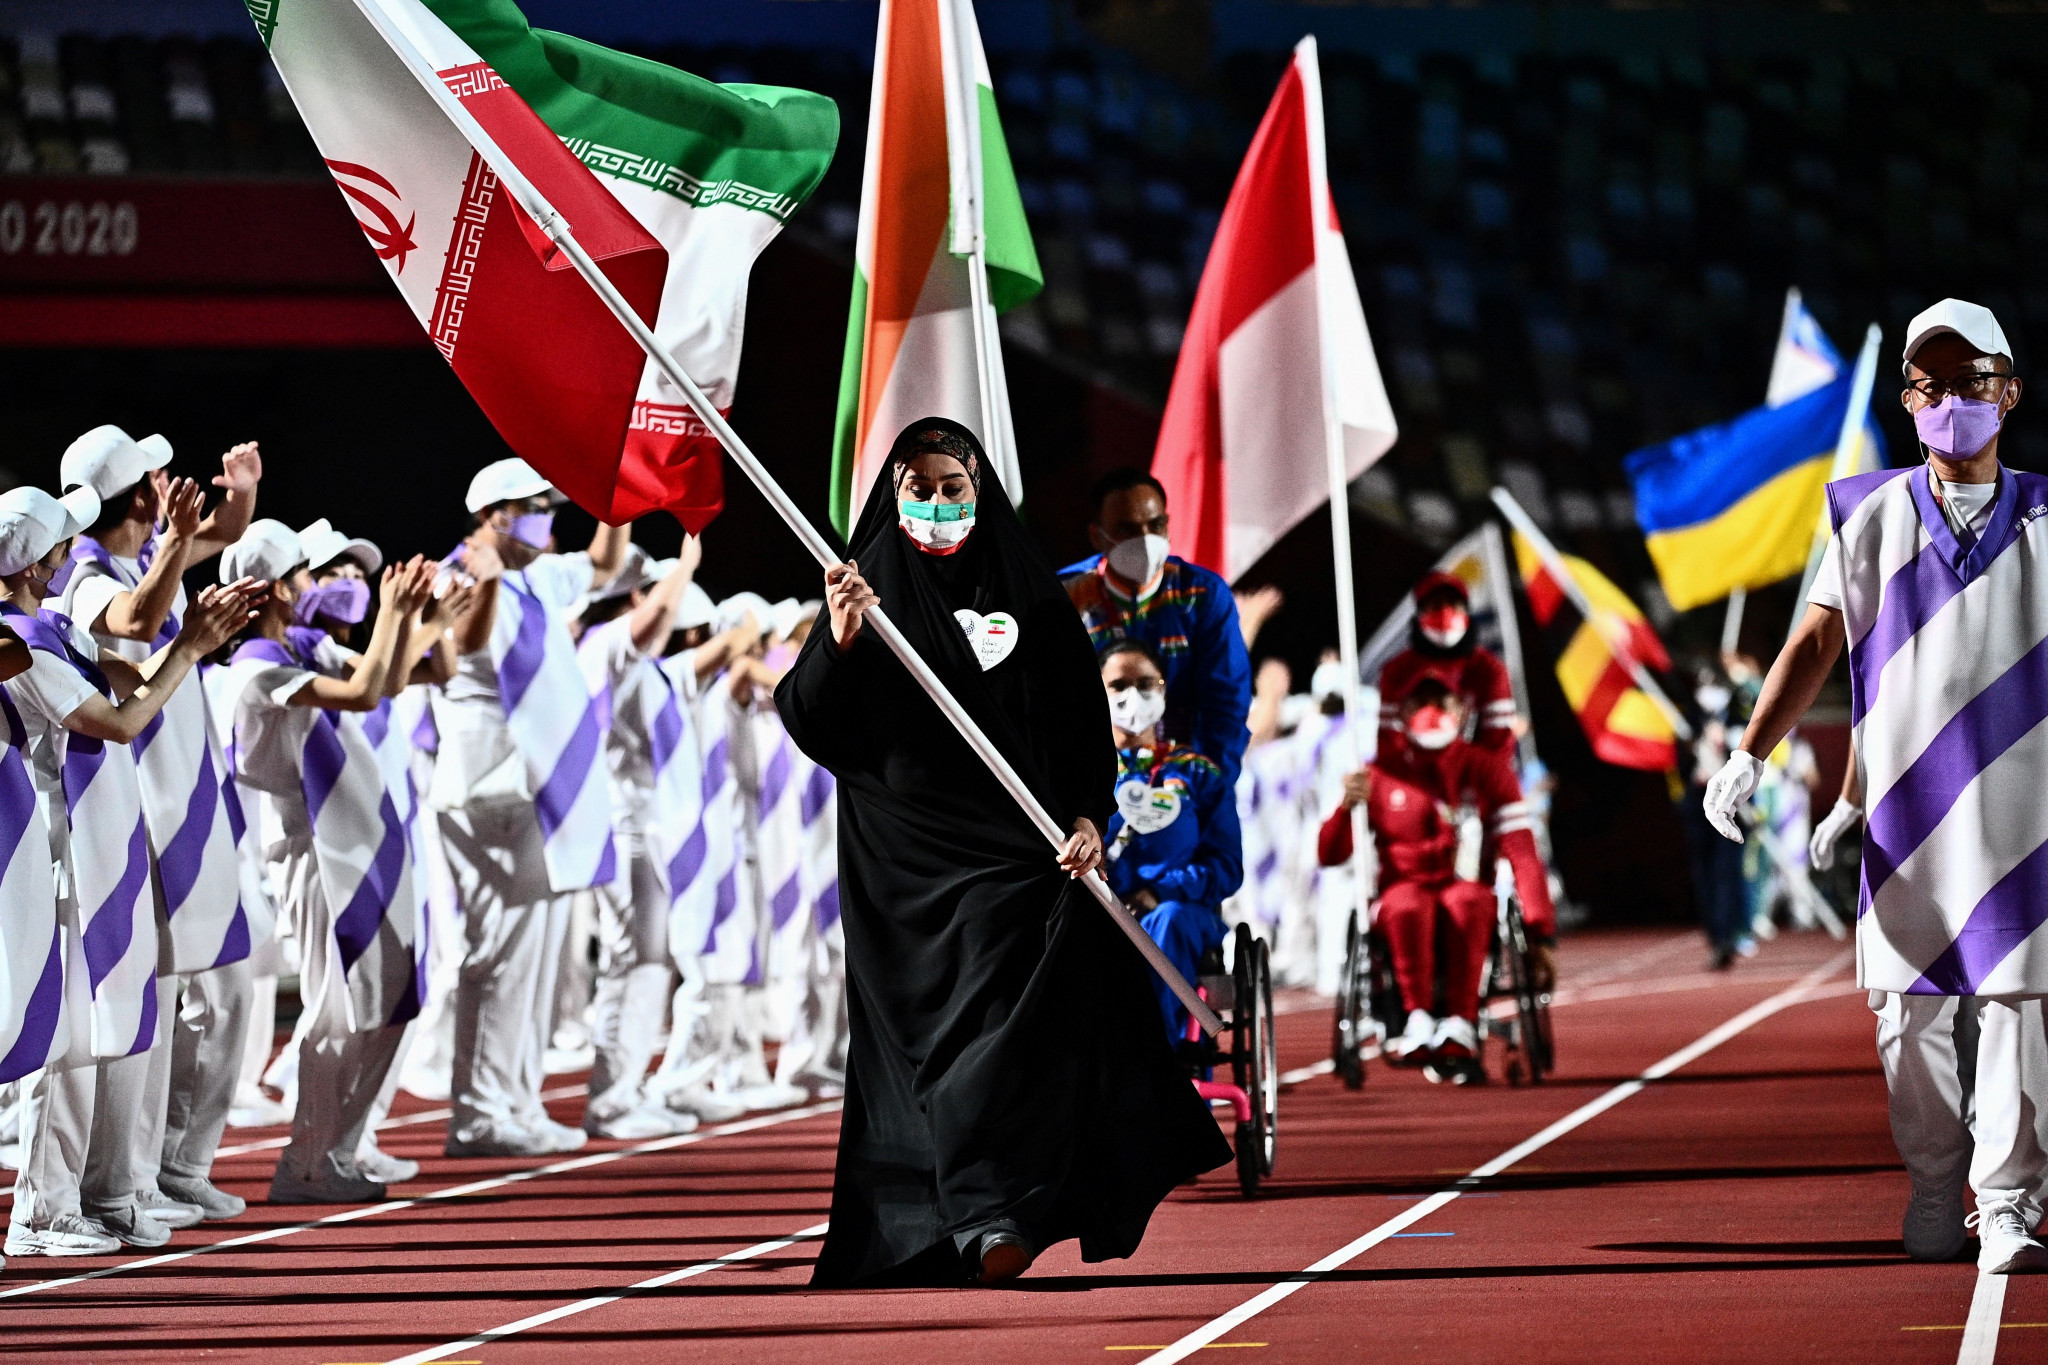 Iran’s Minister of Sports and Youth Affairs says country is ready to host international Para sports events